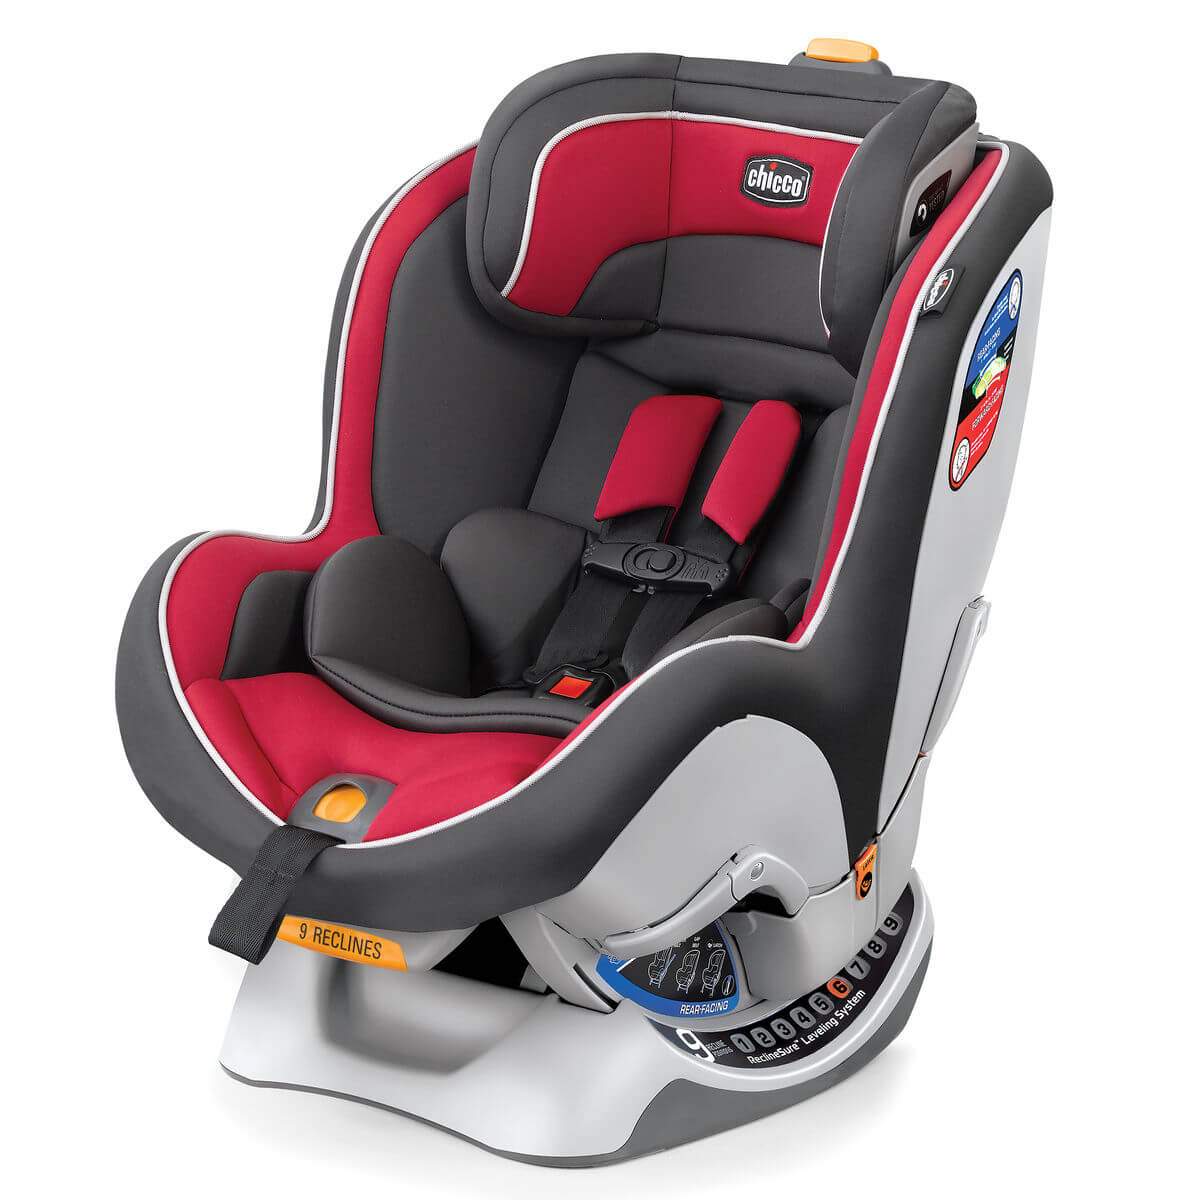 Why Opt for Top Rated Car Seats Lifehack